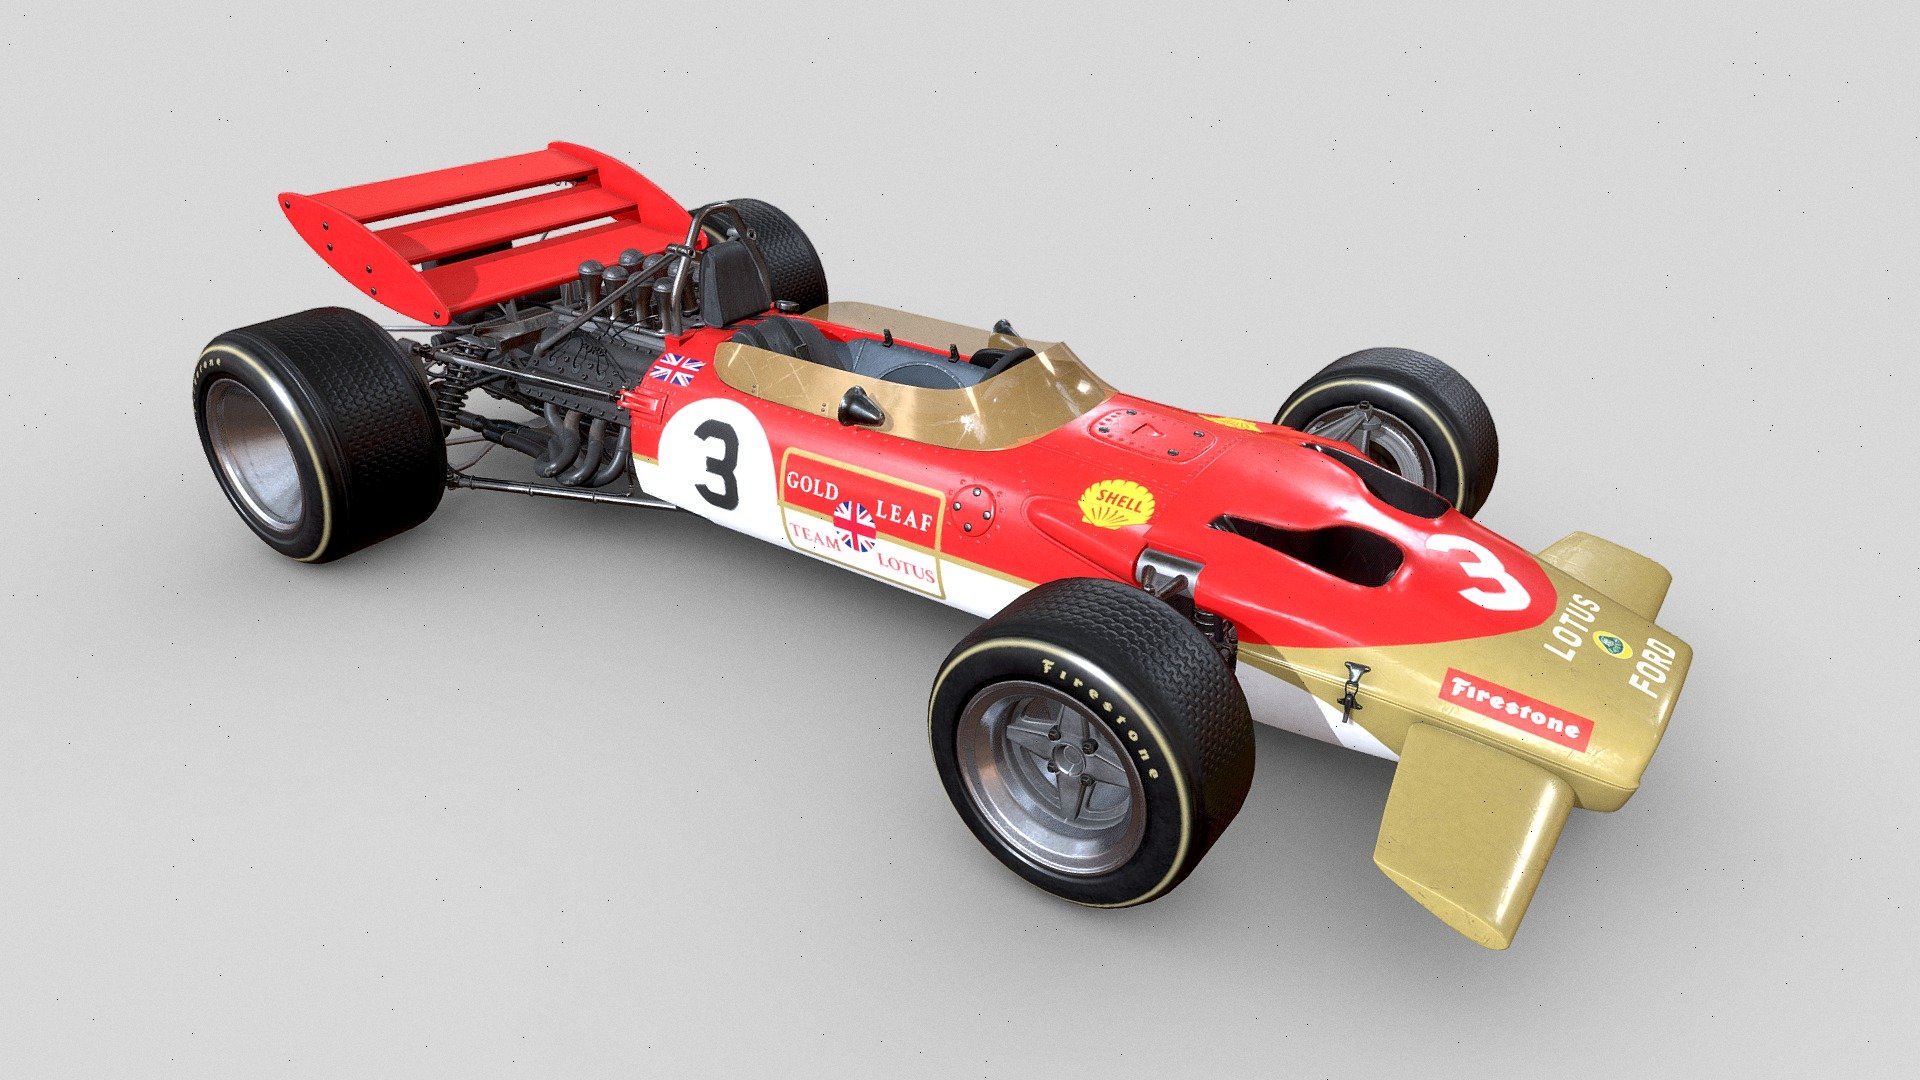 The Lotus 49 was a Formula One racing car designed by Colin Chapman and Maurice Philippe for the 1967 F1 season. It was designed around the Cosworth DFV engine that would power most of the Formula One grid through the 1970s. It was one of the first F1 cars to use a stressed member engine combined with a monocoque to reduce weight, with other teams adopting the concept after its success. It also pioneered the use of aerofoils to generate downforce.

Jim Clark won on the car's debut, in 1967, and it would also provide him with the last win of his career, in 1968. Graham Hill went on to win that year's title and the car continued winning races until 1970 3d model